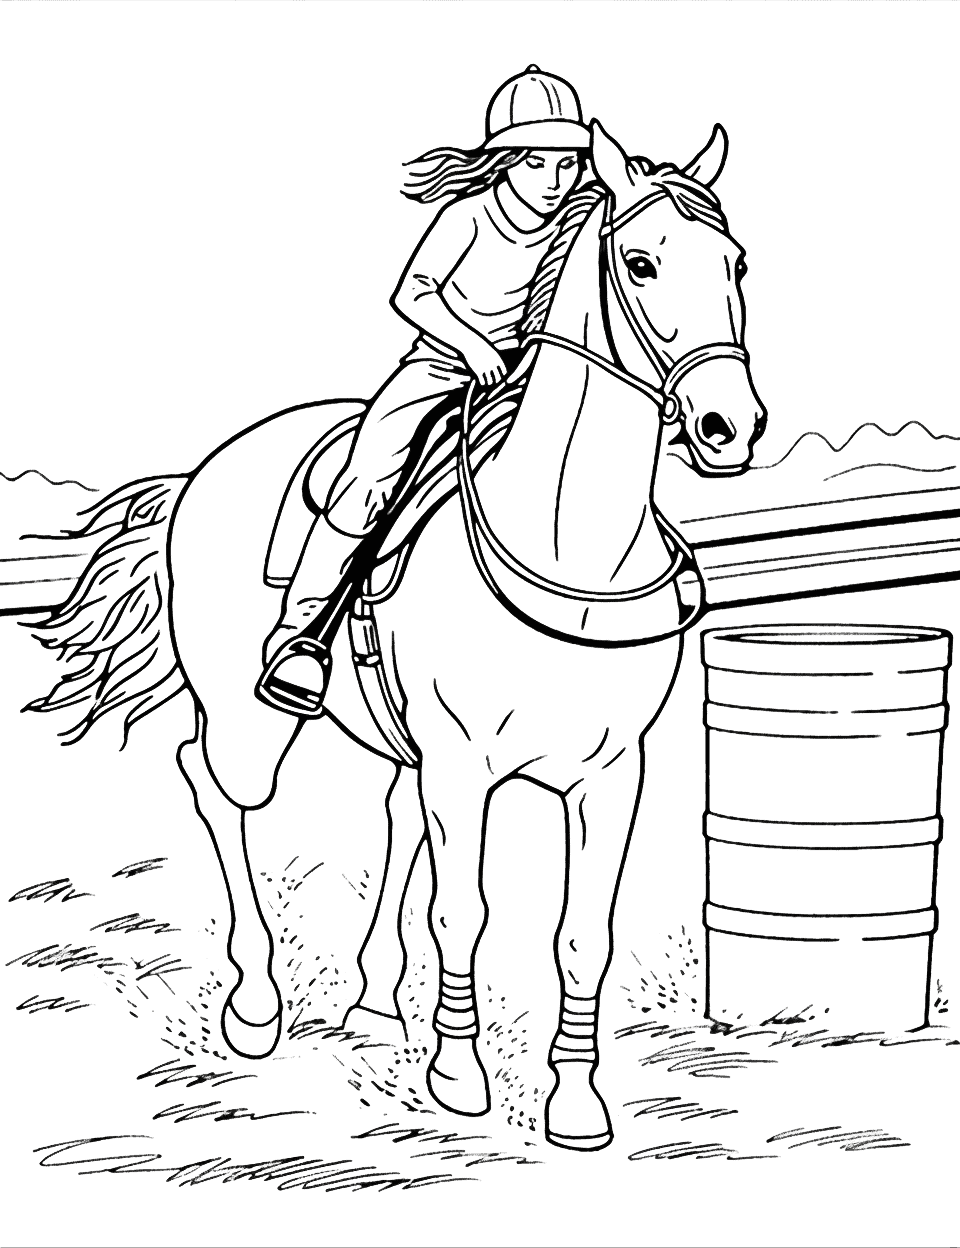 Rodeo Barrel Racing Horse Coloring Page - A high-energy rodeo scene featuring a horse and rider team in a barrel racing event.